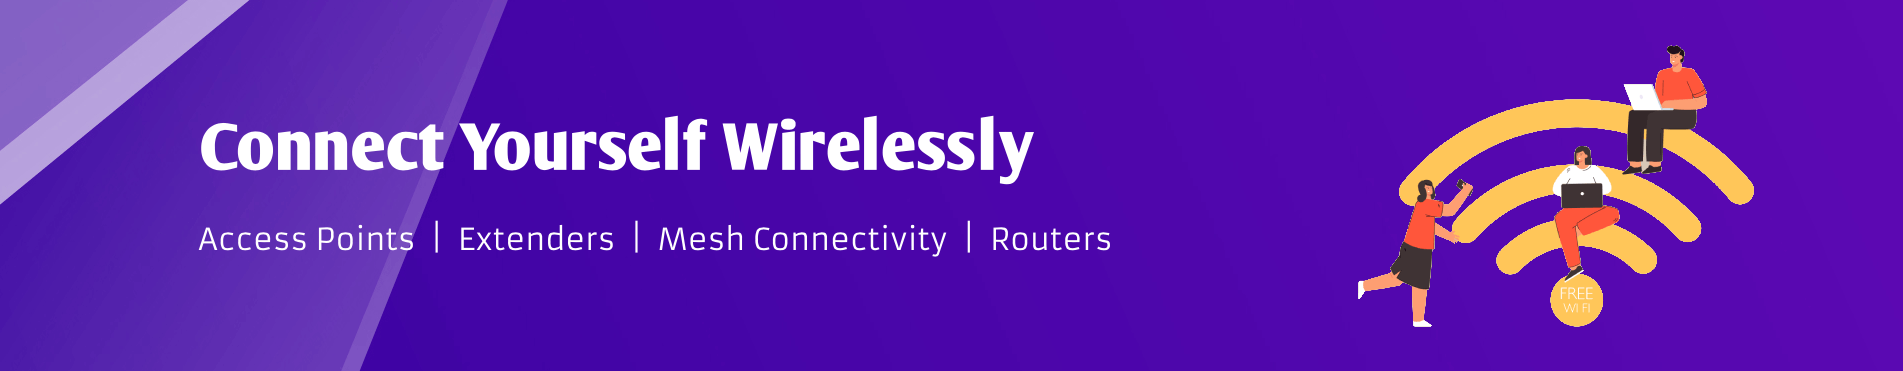 Connect yourself Wirelessly - Access Points, Extenders, Mesh Connectivity, Routers - best prices on tecneek !